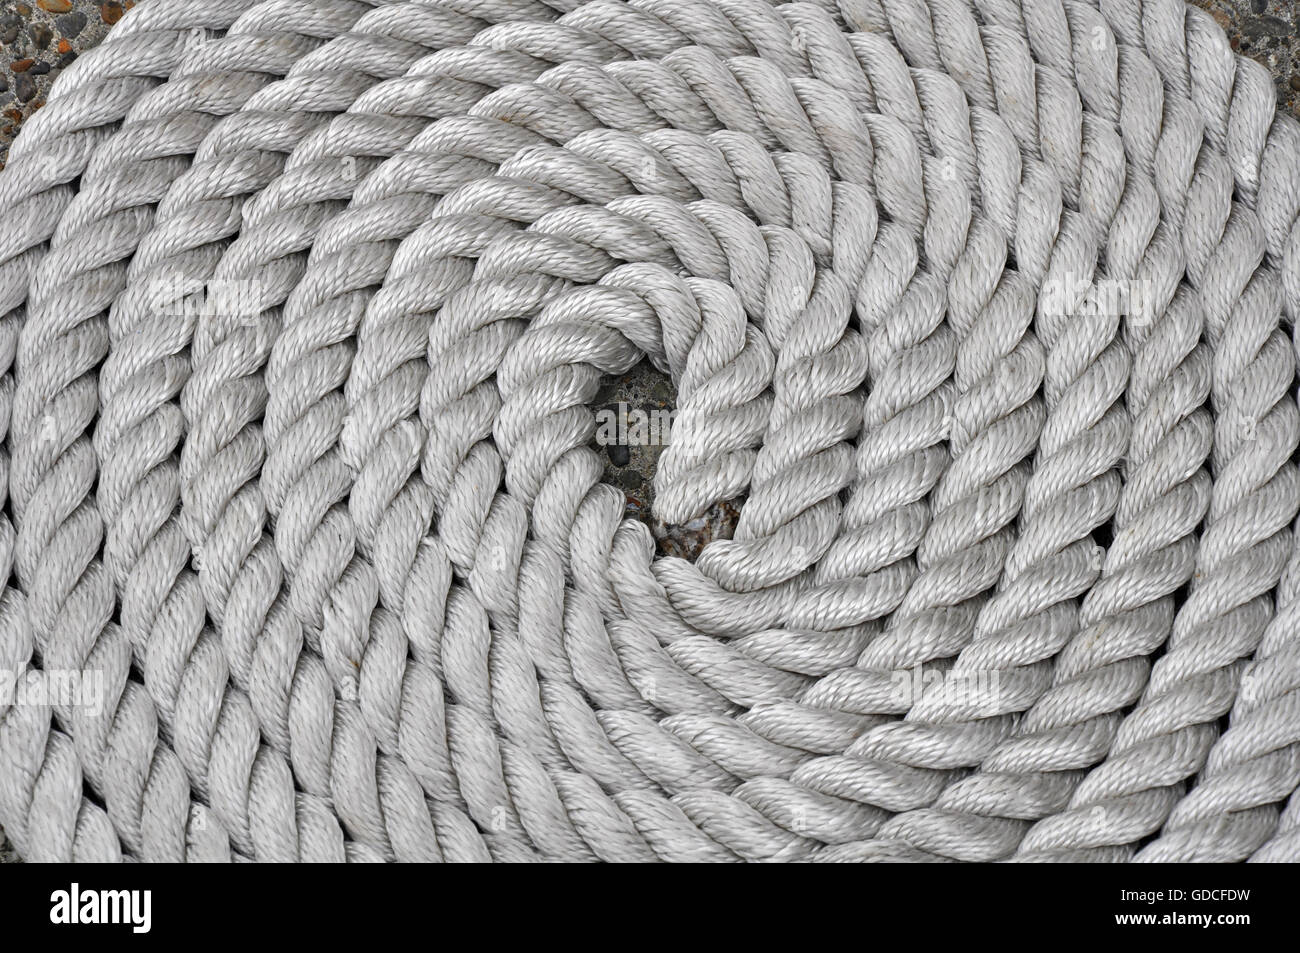 Twisting rope pattern in circles Stock Photo